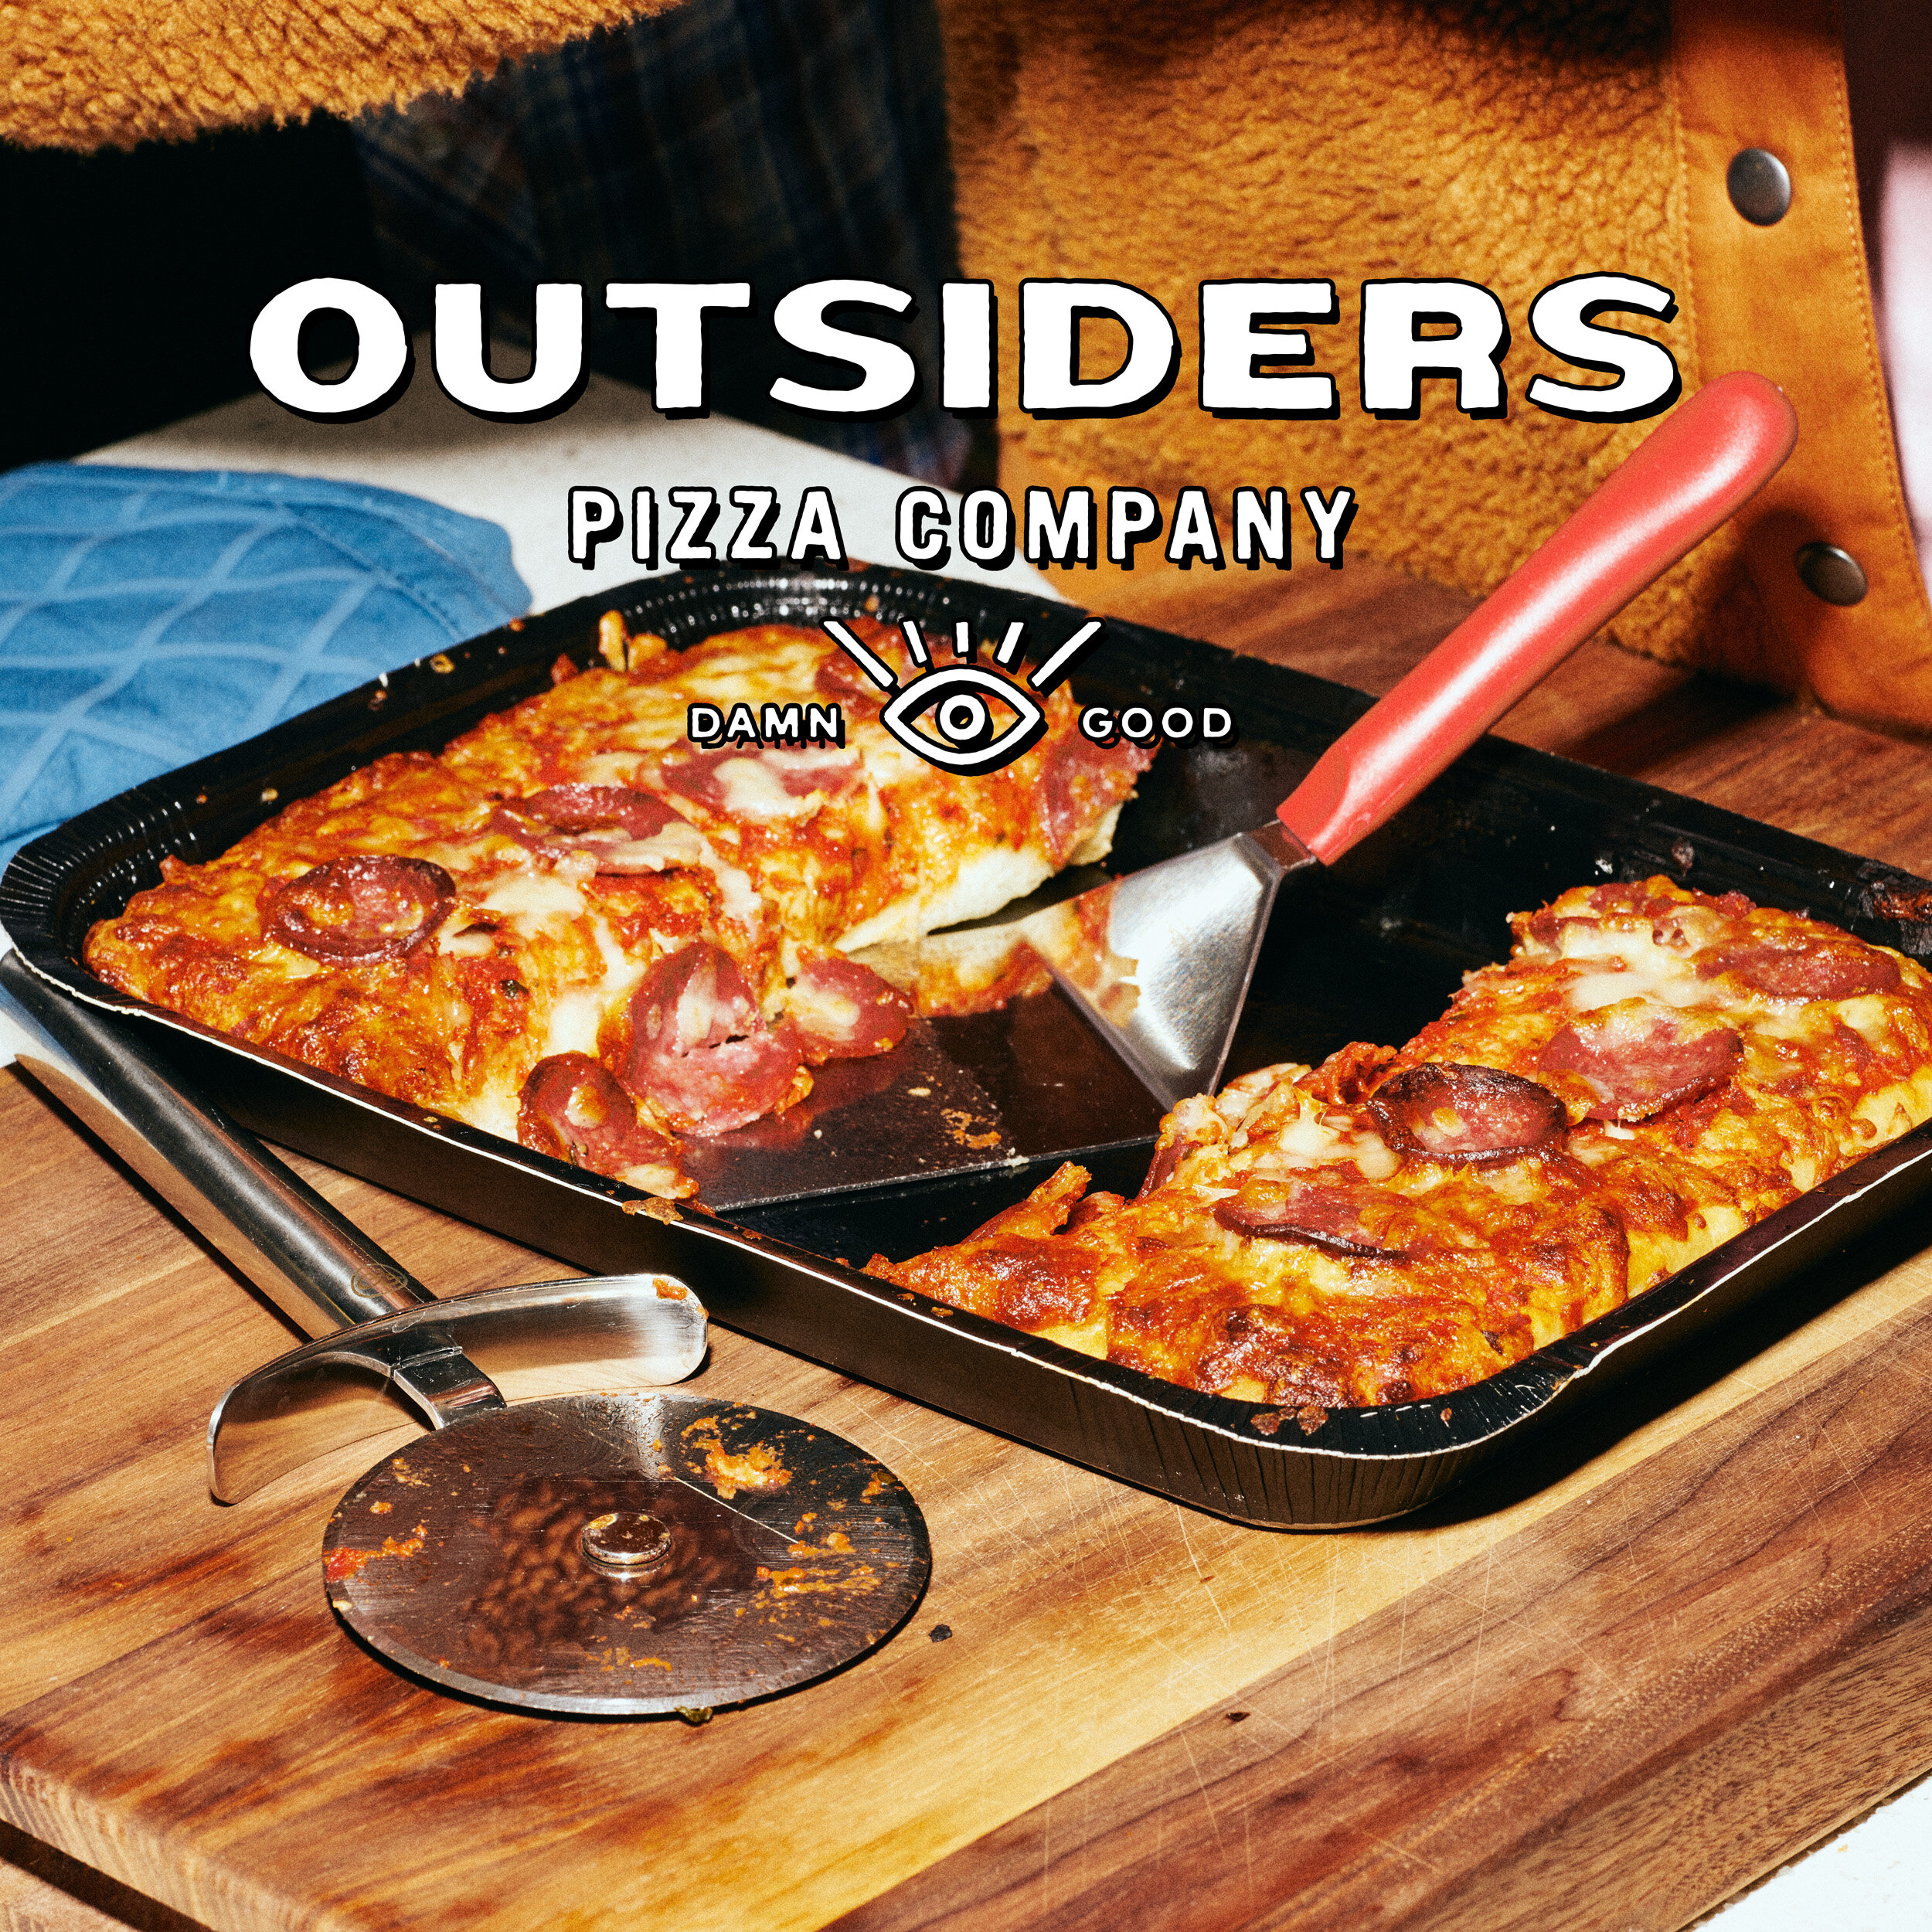  Lifestyle and still life image library for Outsiders Pizza Company 